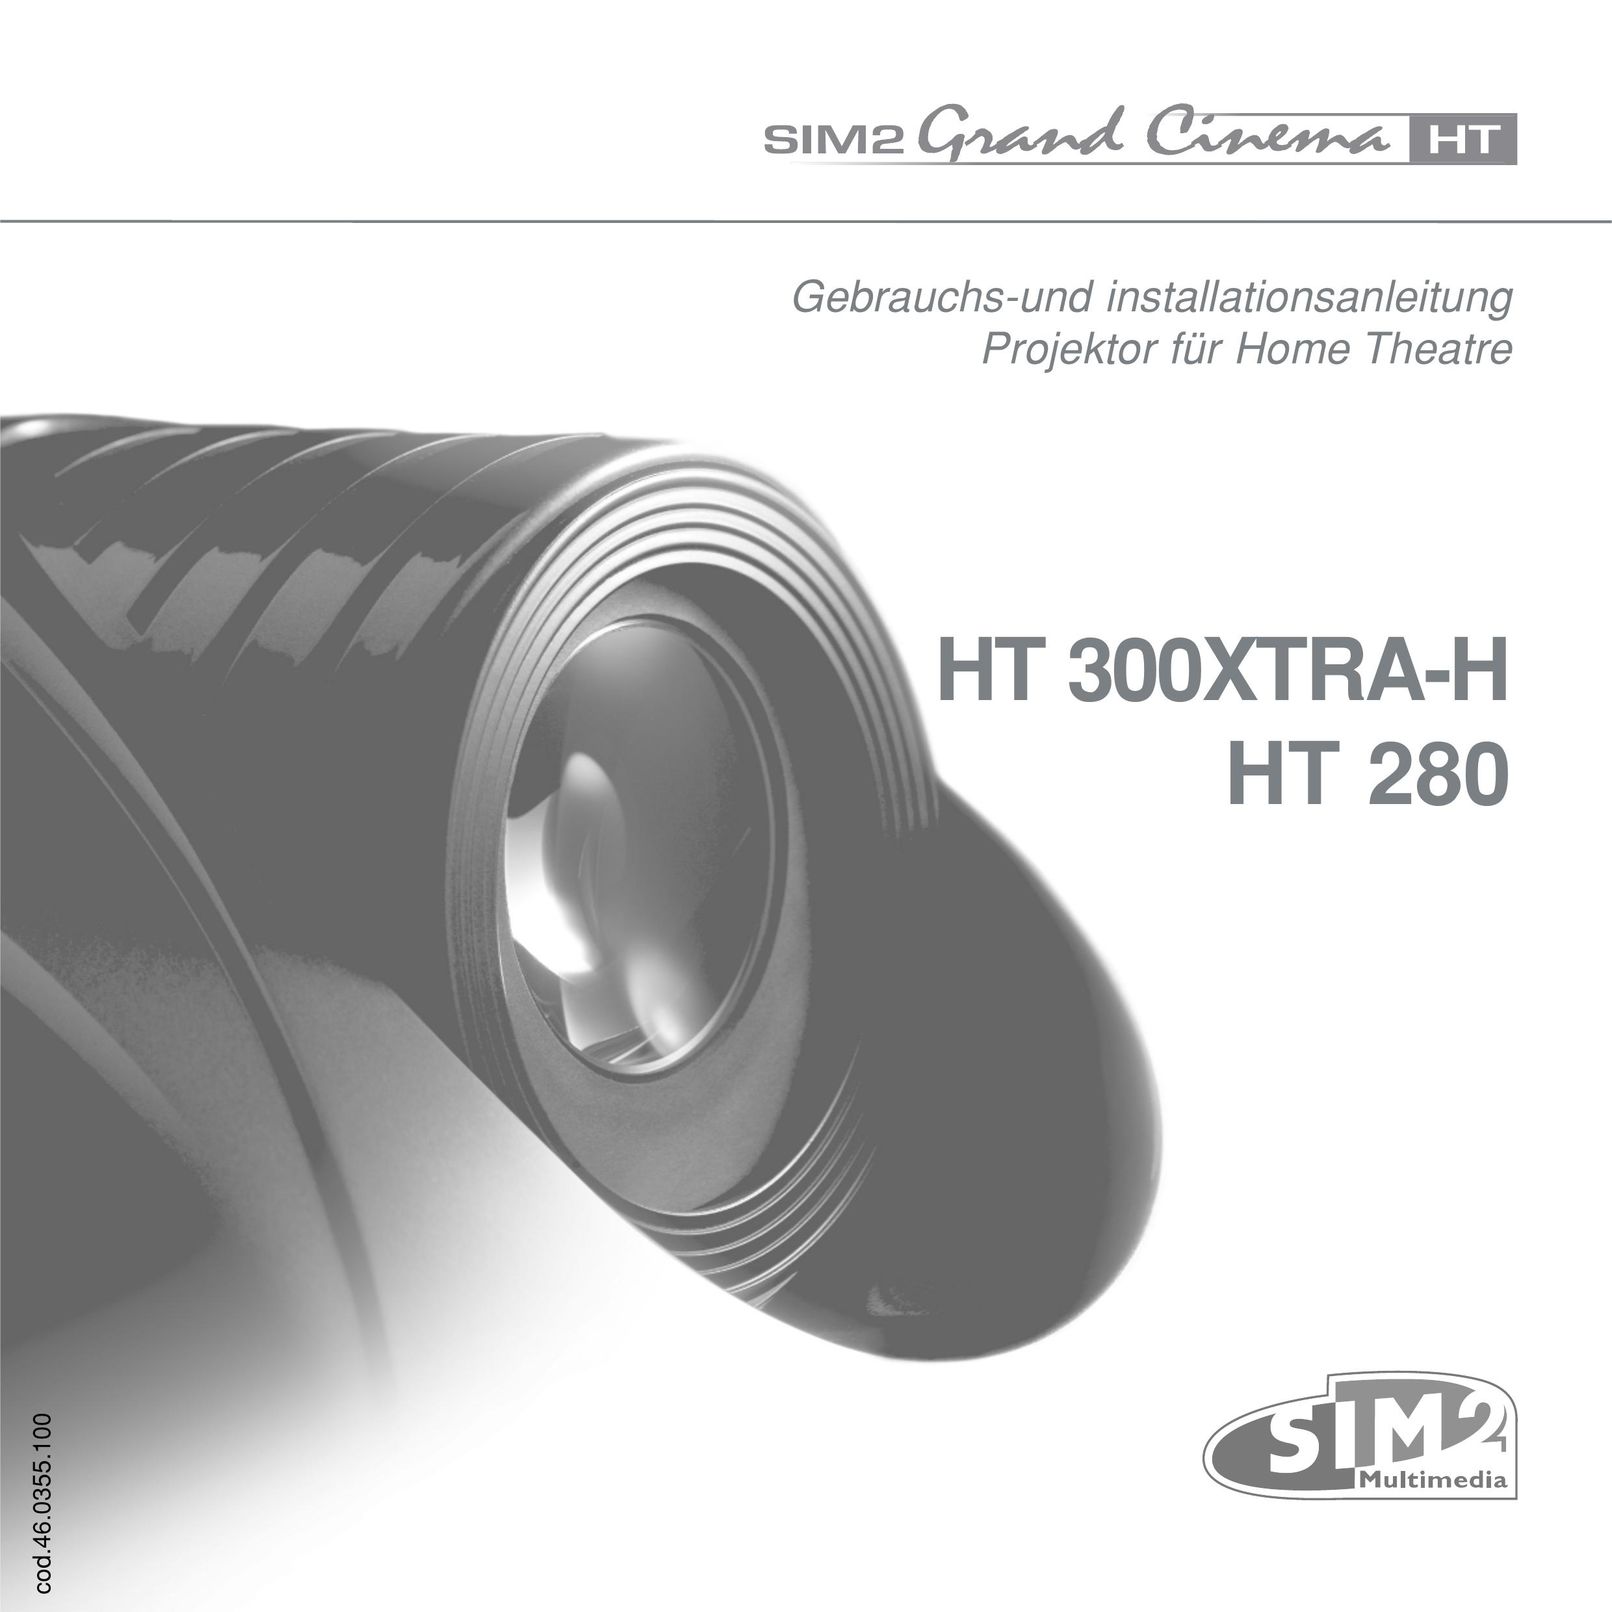 Sim2 Multimedia HT300 XTRA-H Home Theater System User Manual